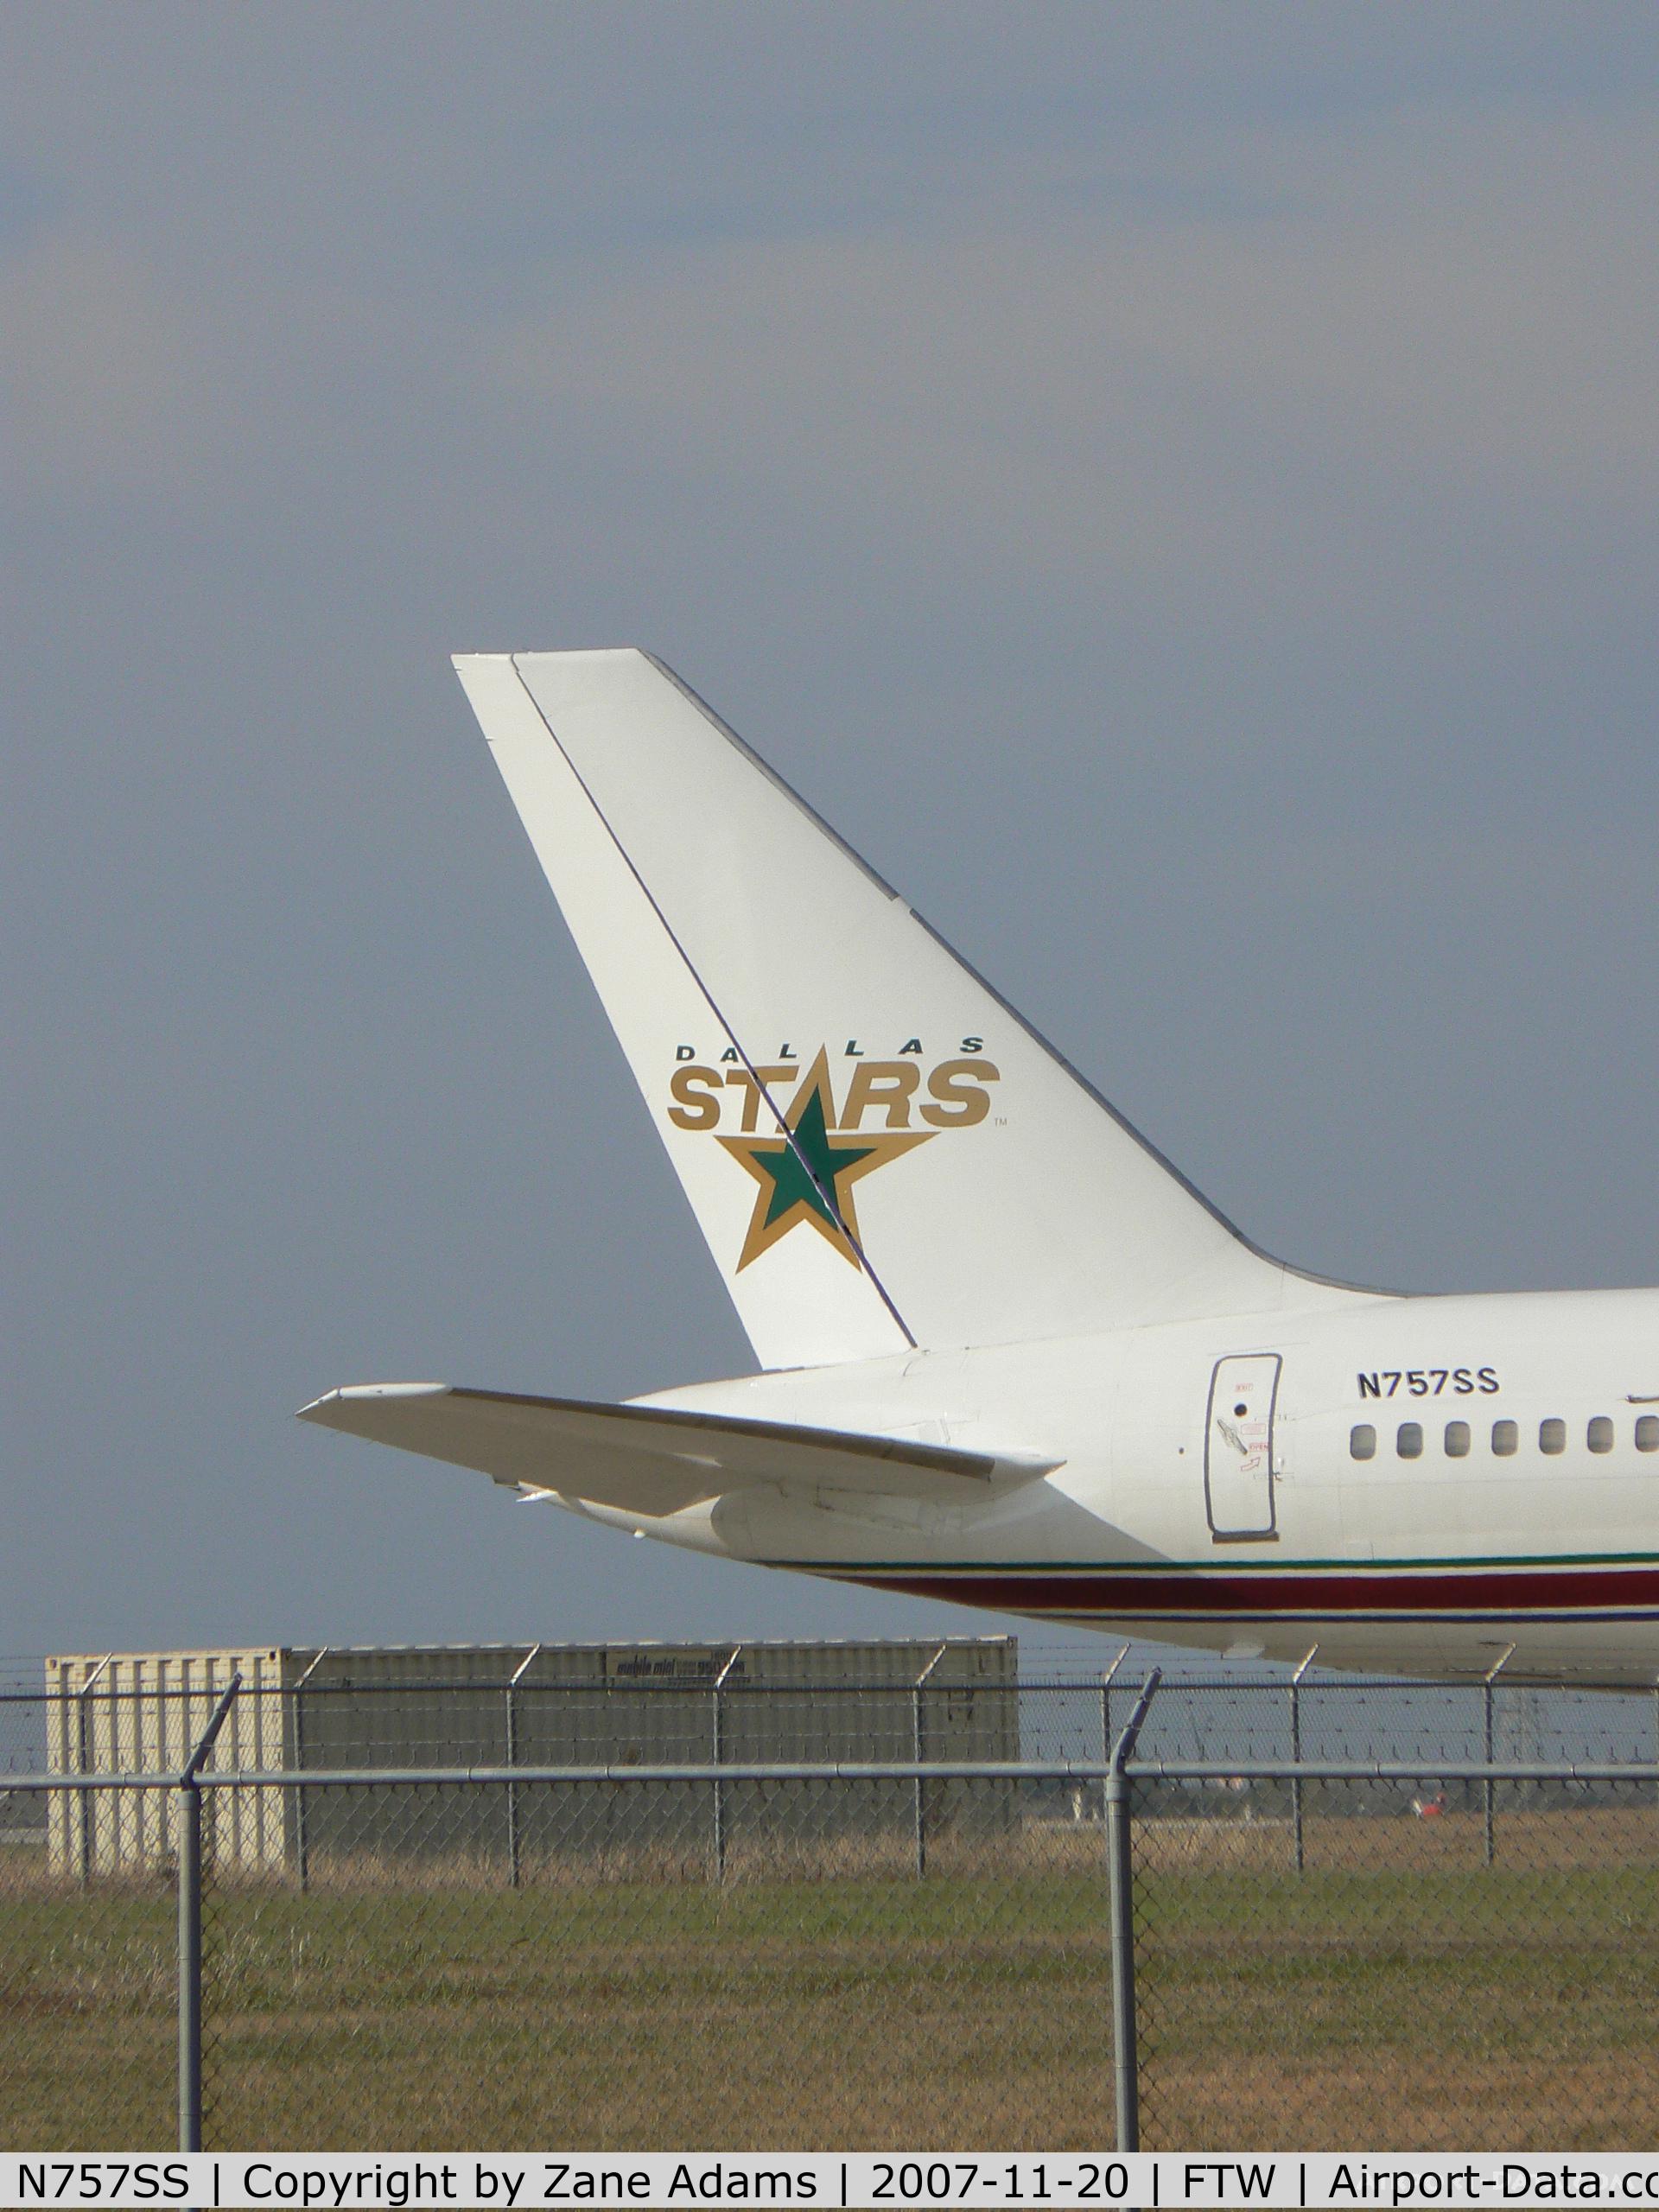 N757SS, 1983 Boeing 757-236 C/N 22176, New Dallas Stars Hockey and Texas Rangers Base Ball (painted on other side) Airplane